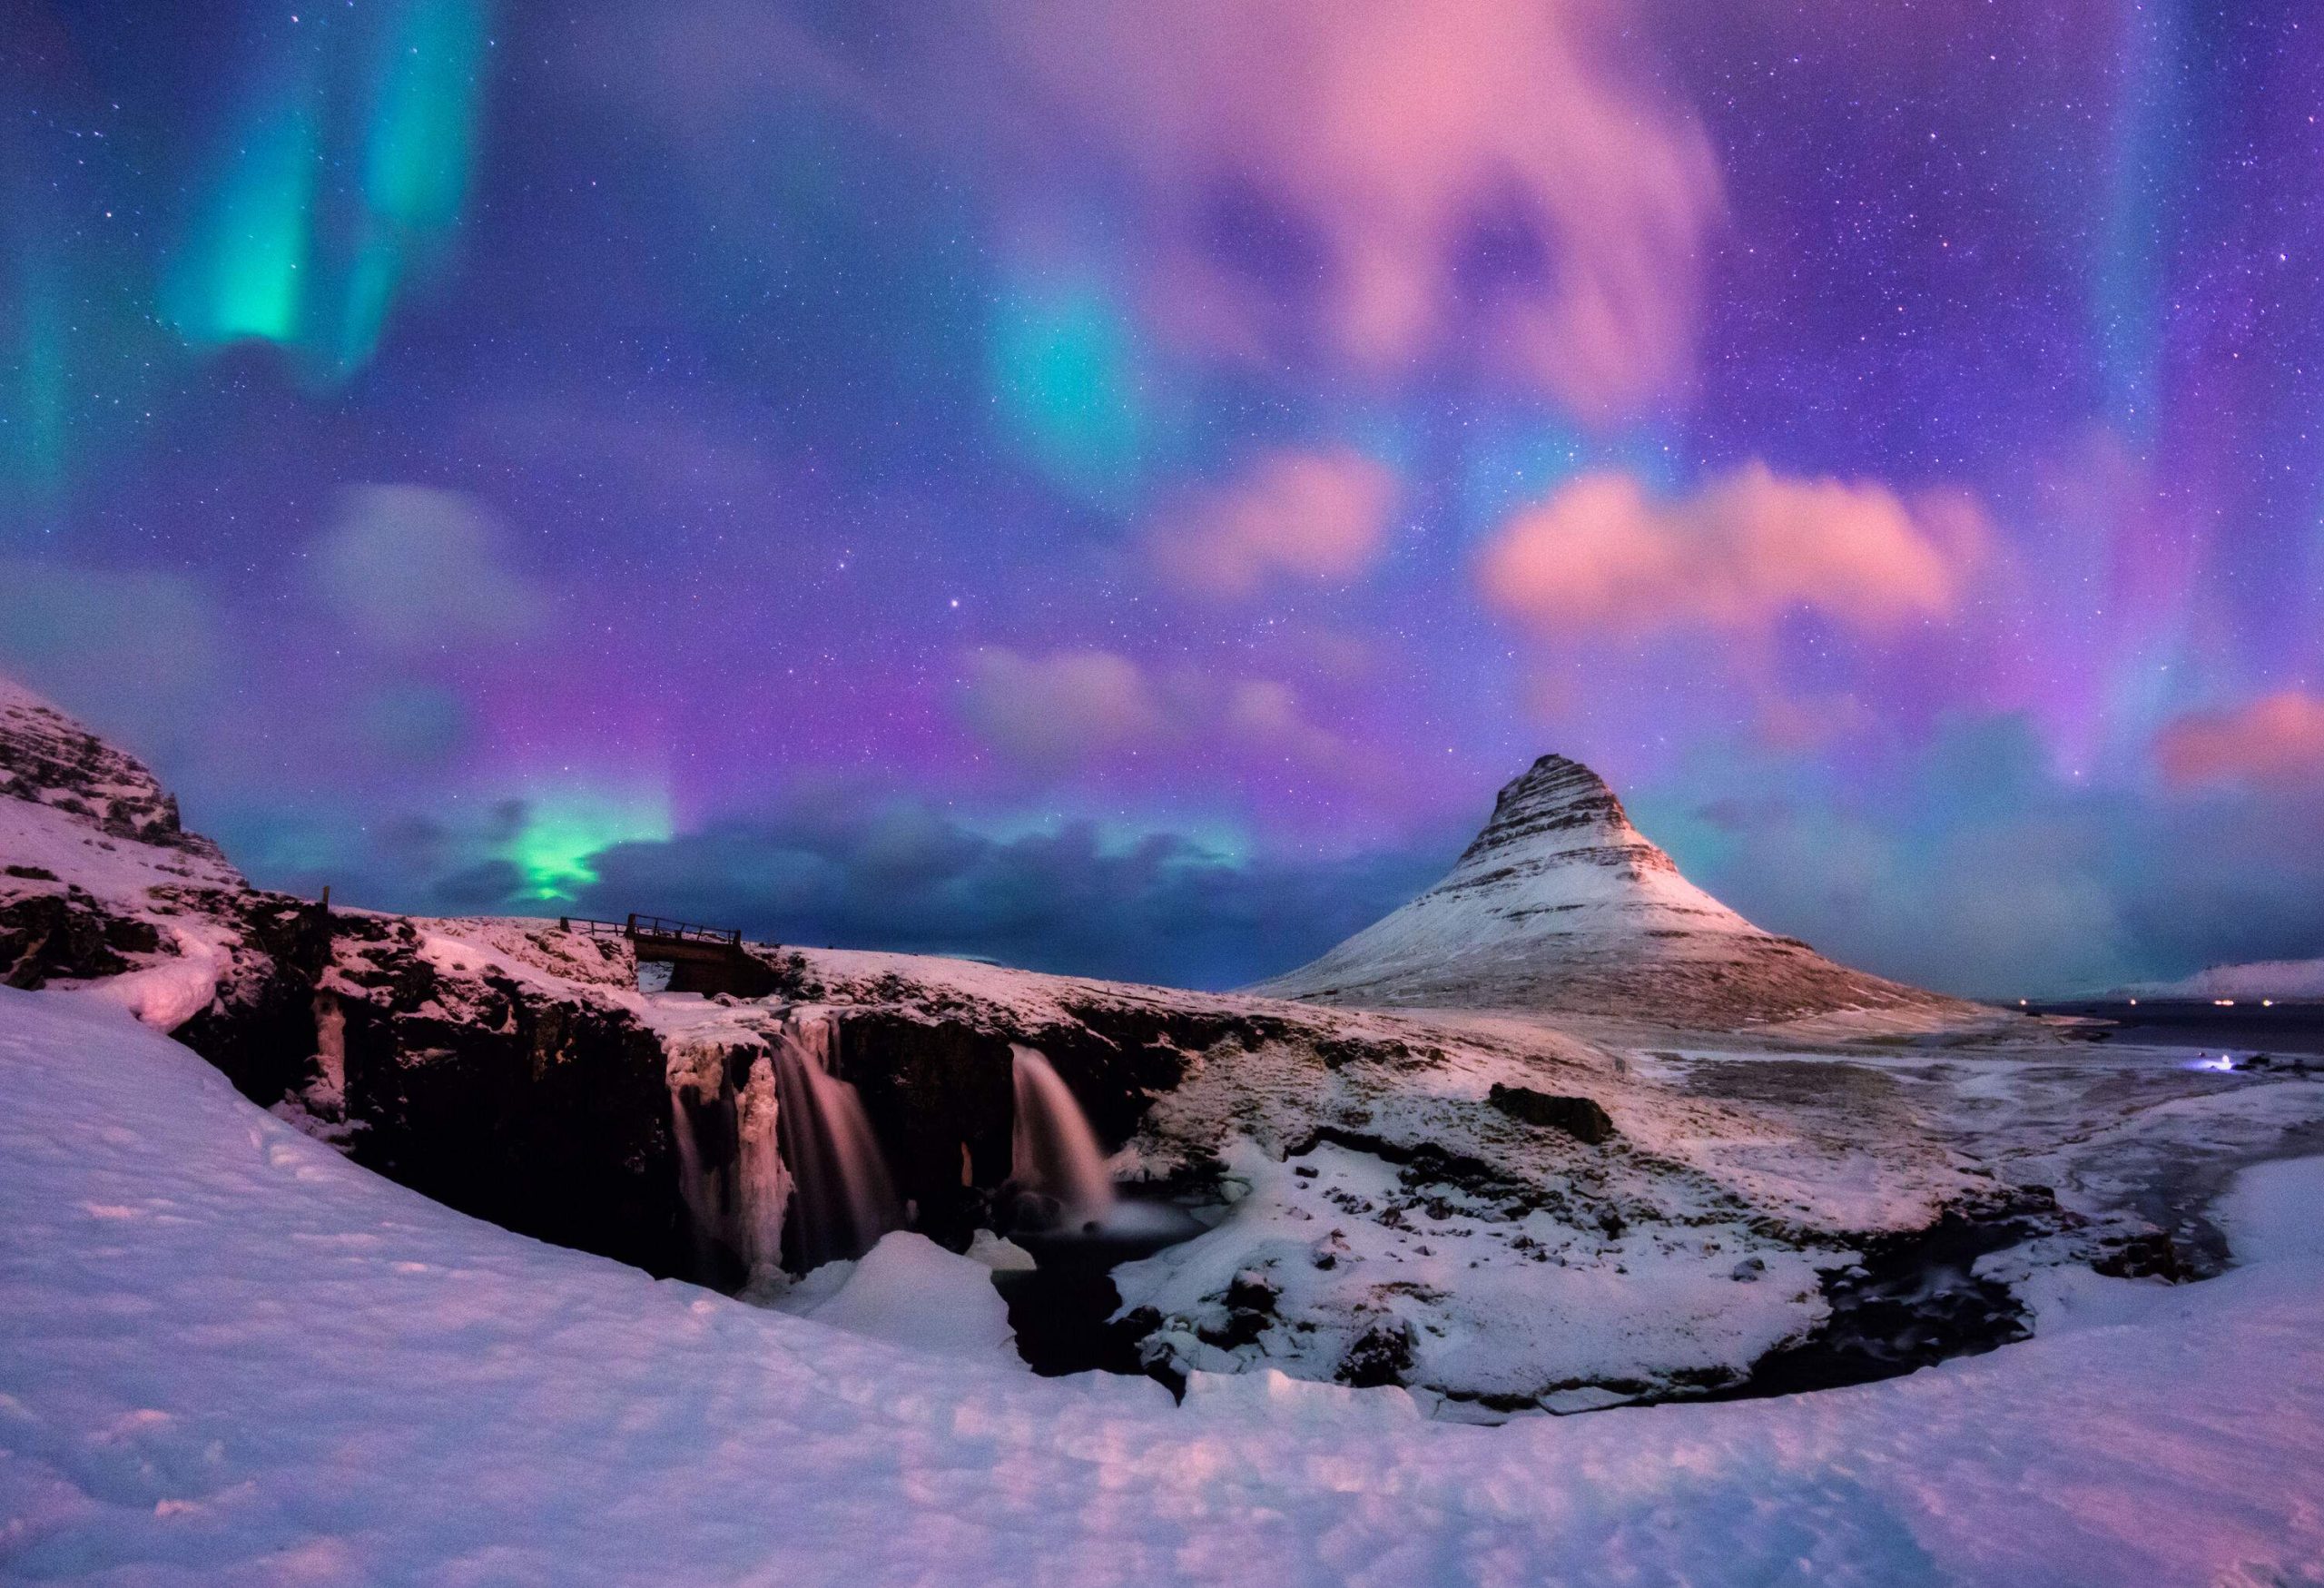 A vibrant night sky hovering over the snow-covered Kirkjufell Mountain.